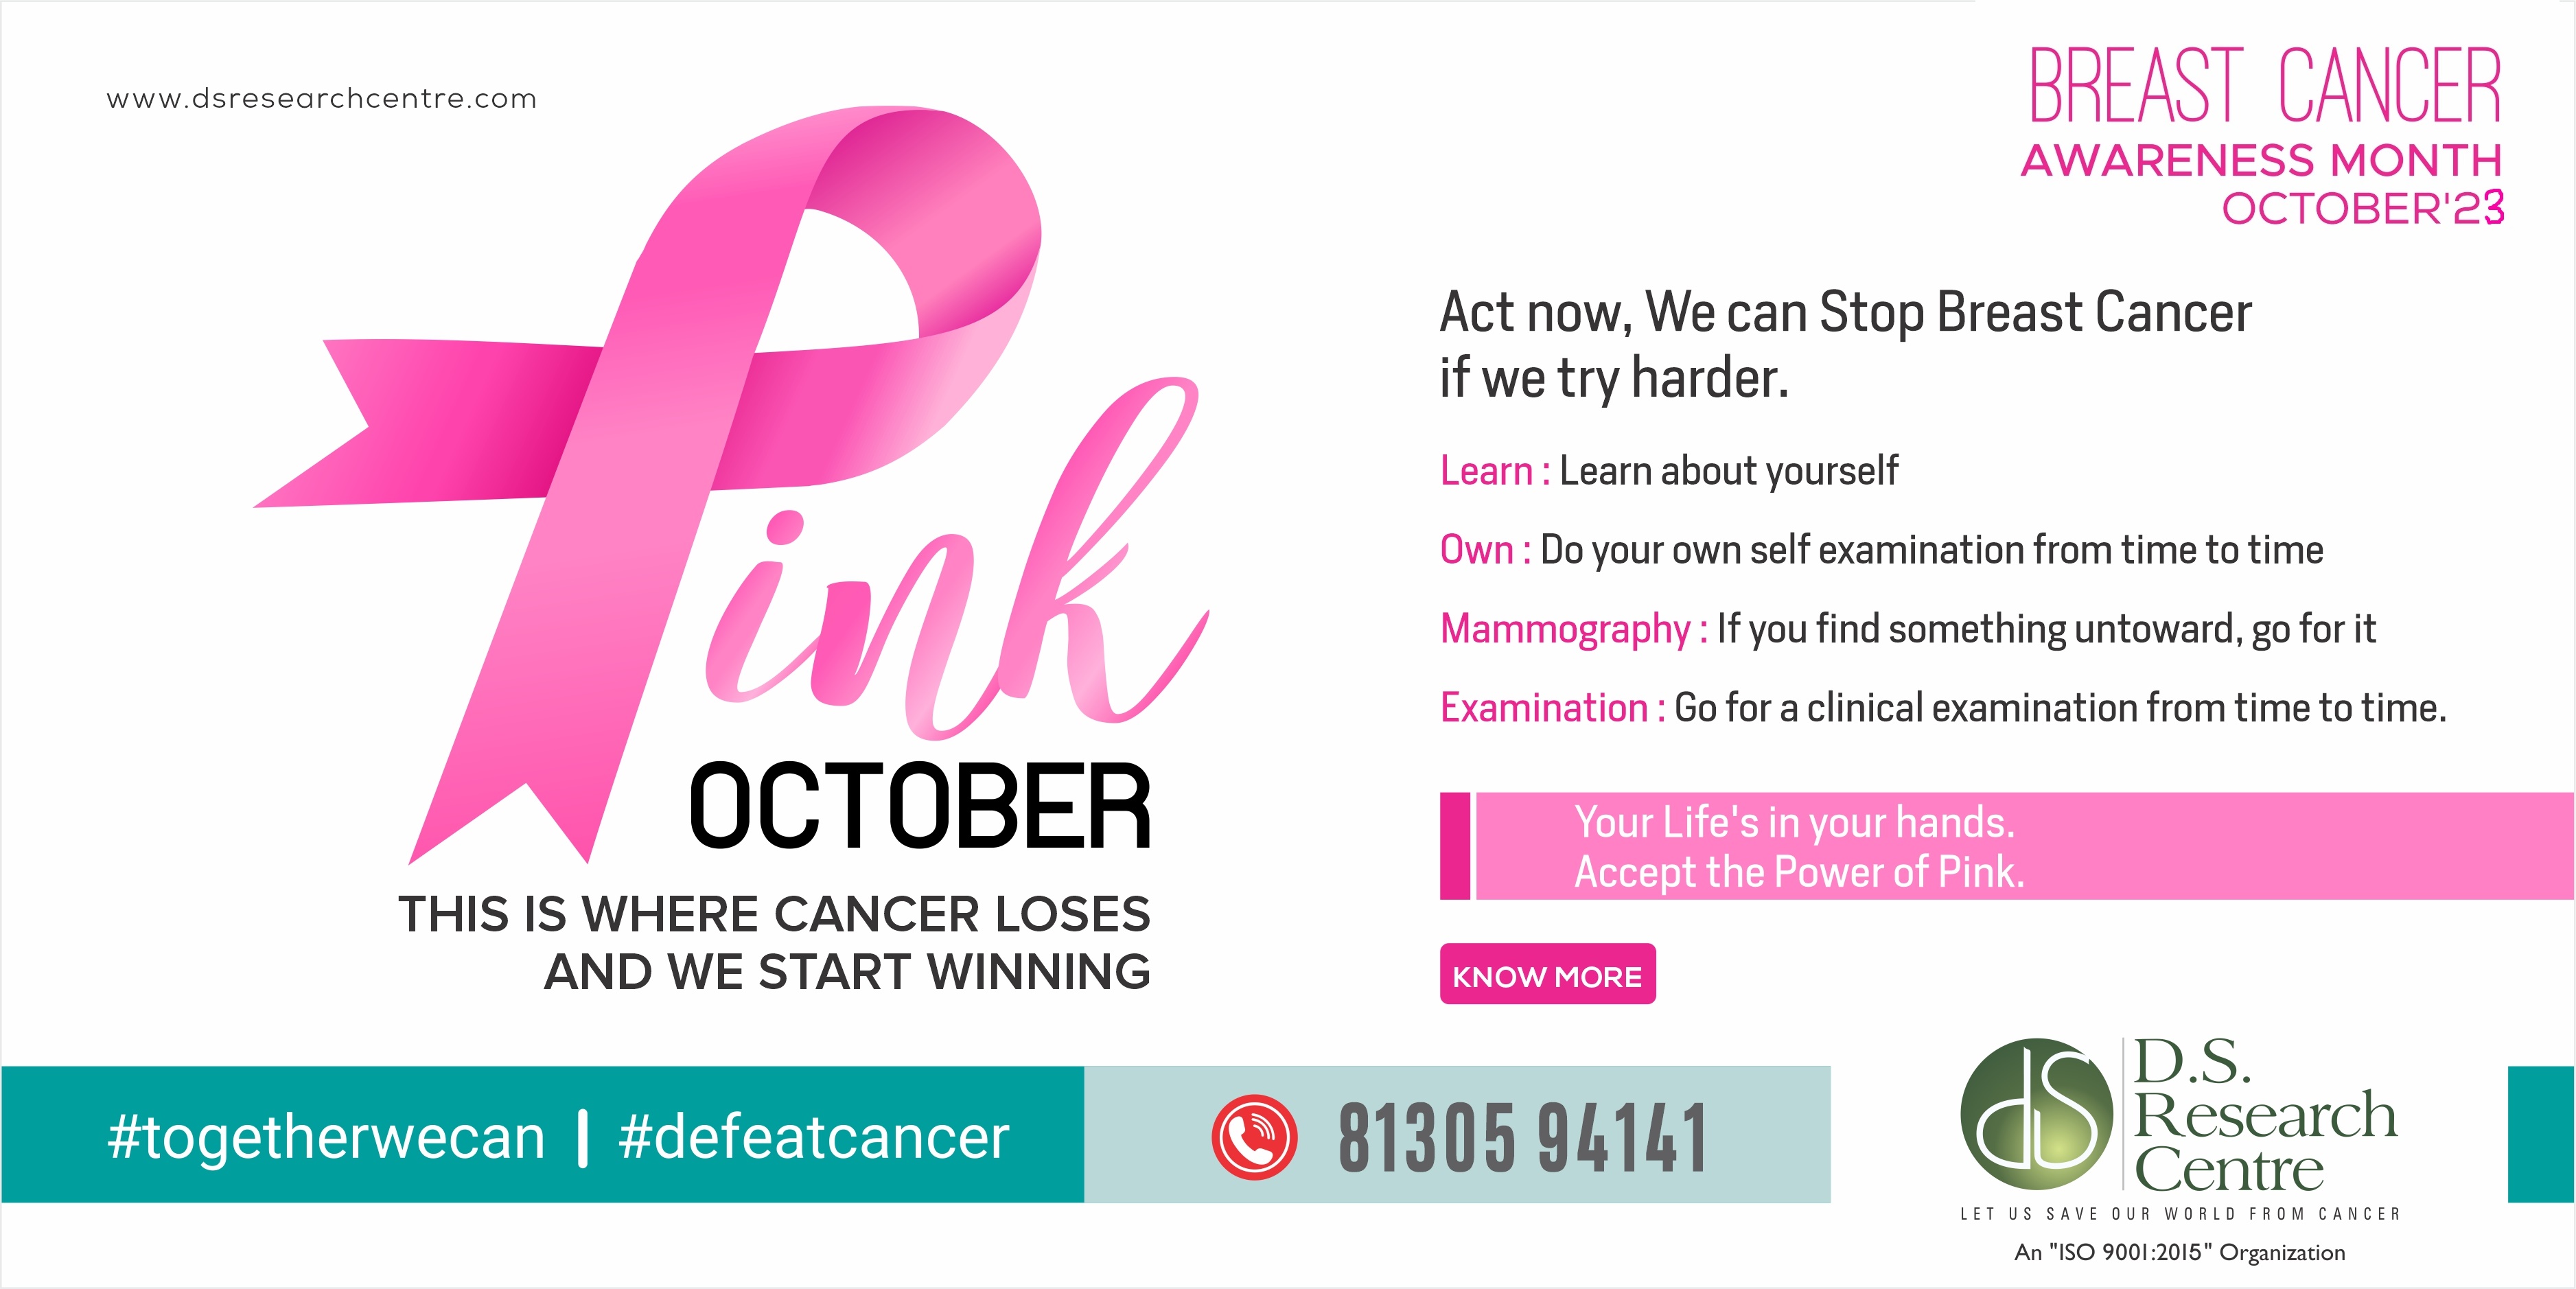 BREAST CANCER - AWARENESS IS FIRST STEP TOWARDS SURVIVAL